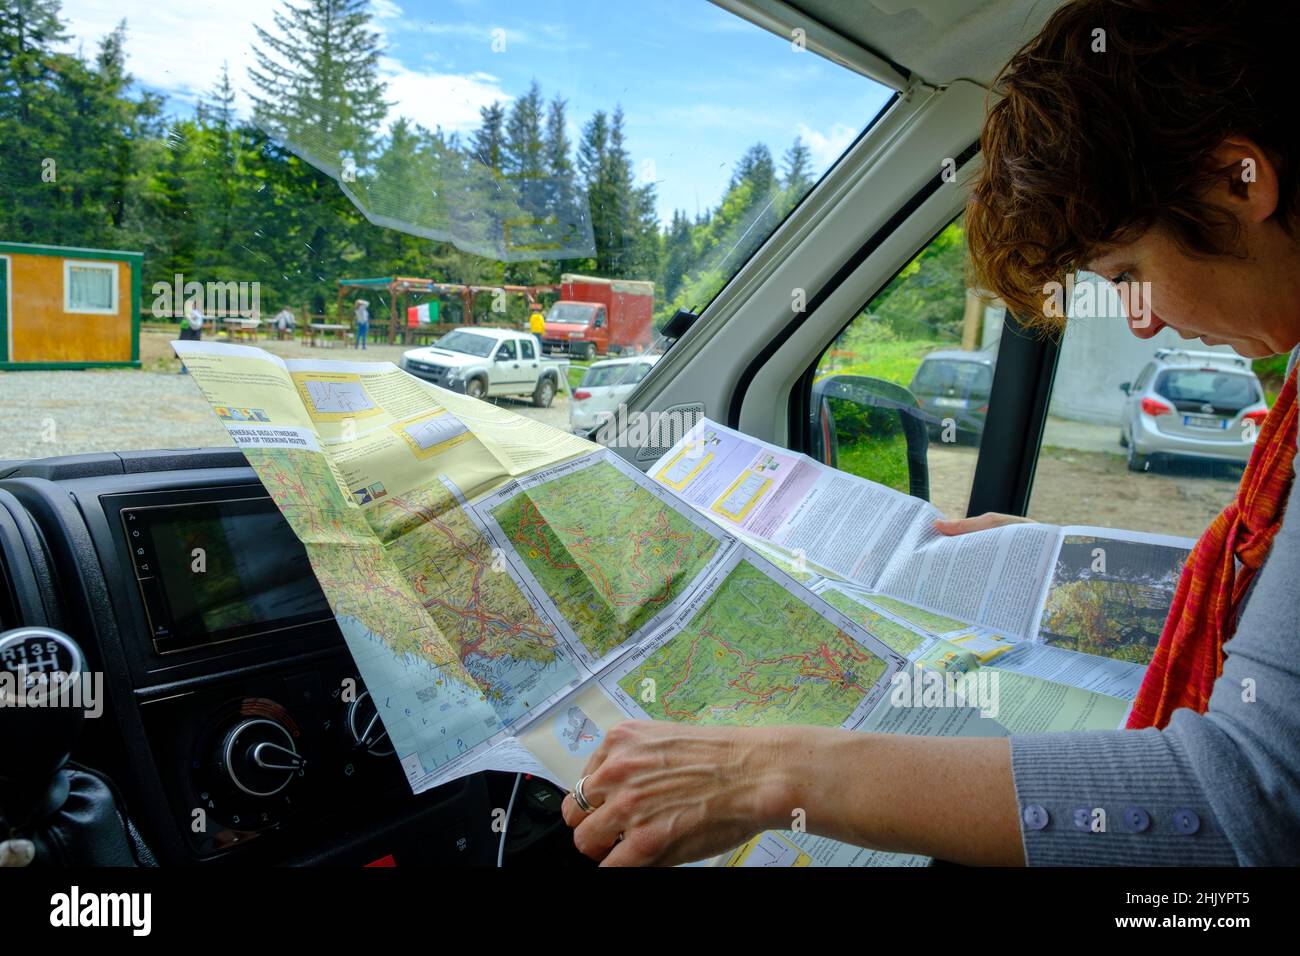 Woman studying a roadmap on her red camper van Stock Photo